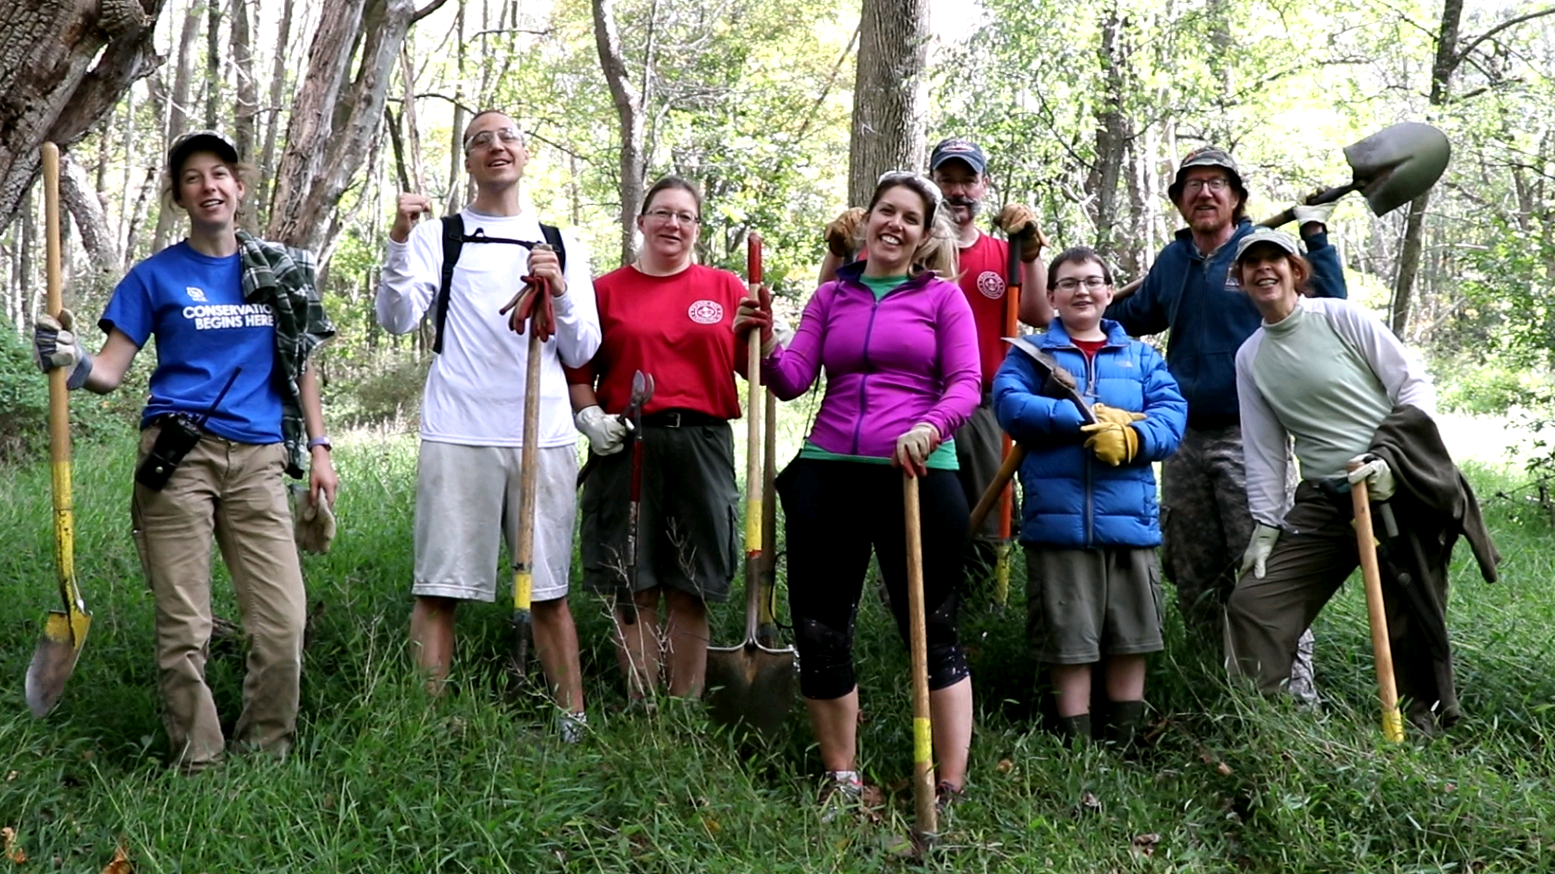 A volunteer crew poses with tools after a day of work.